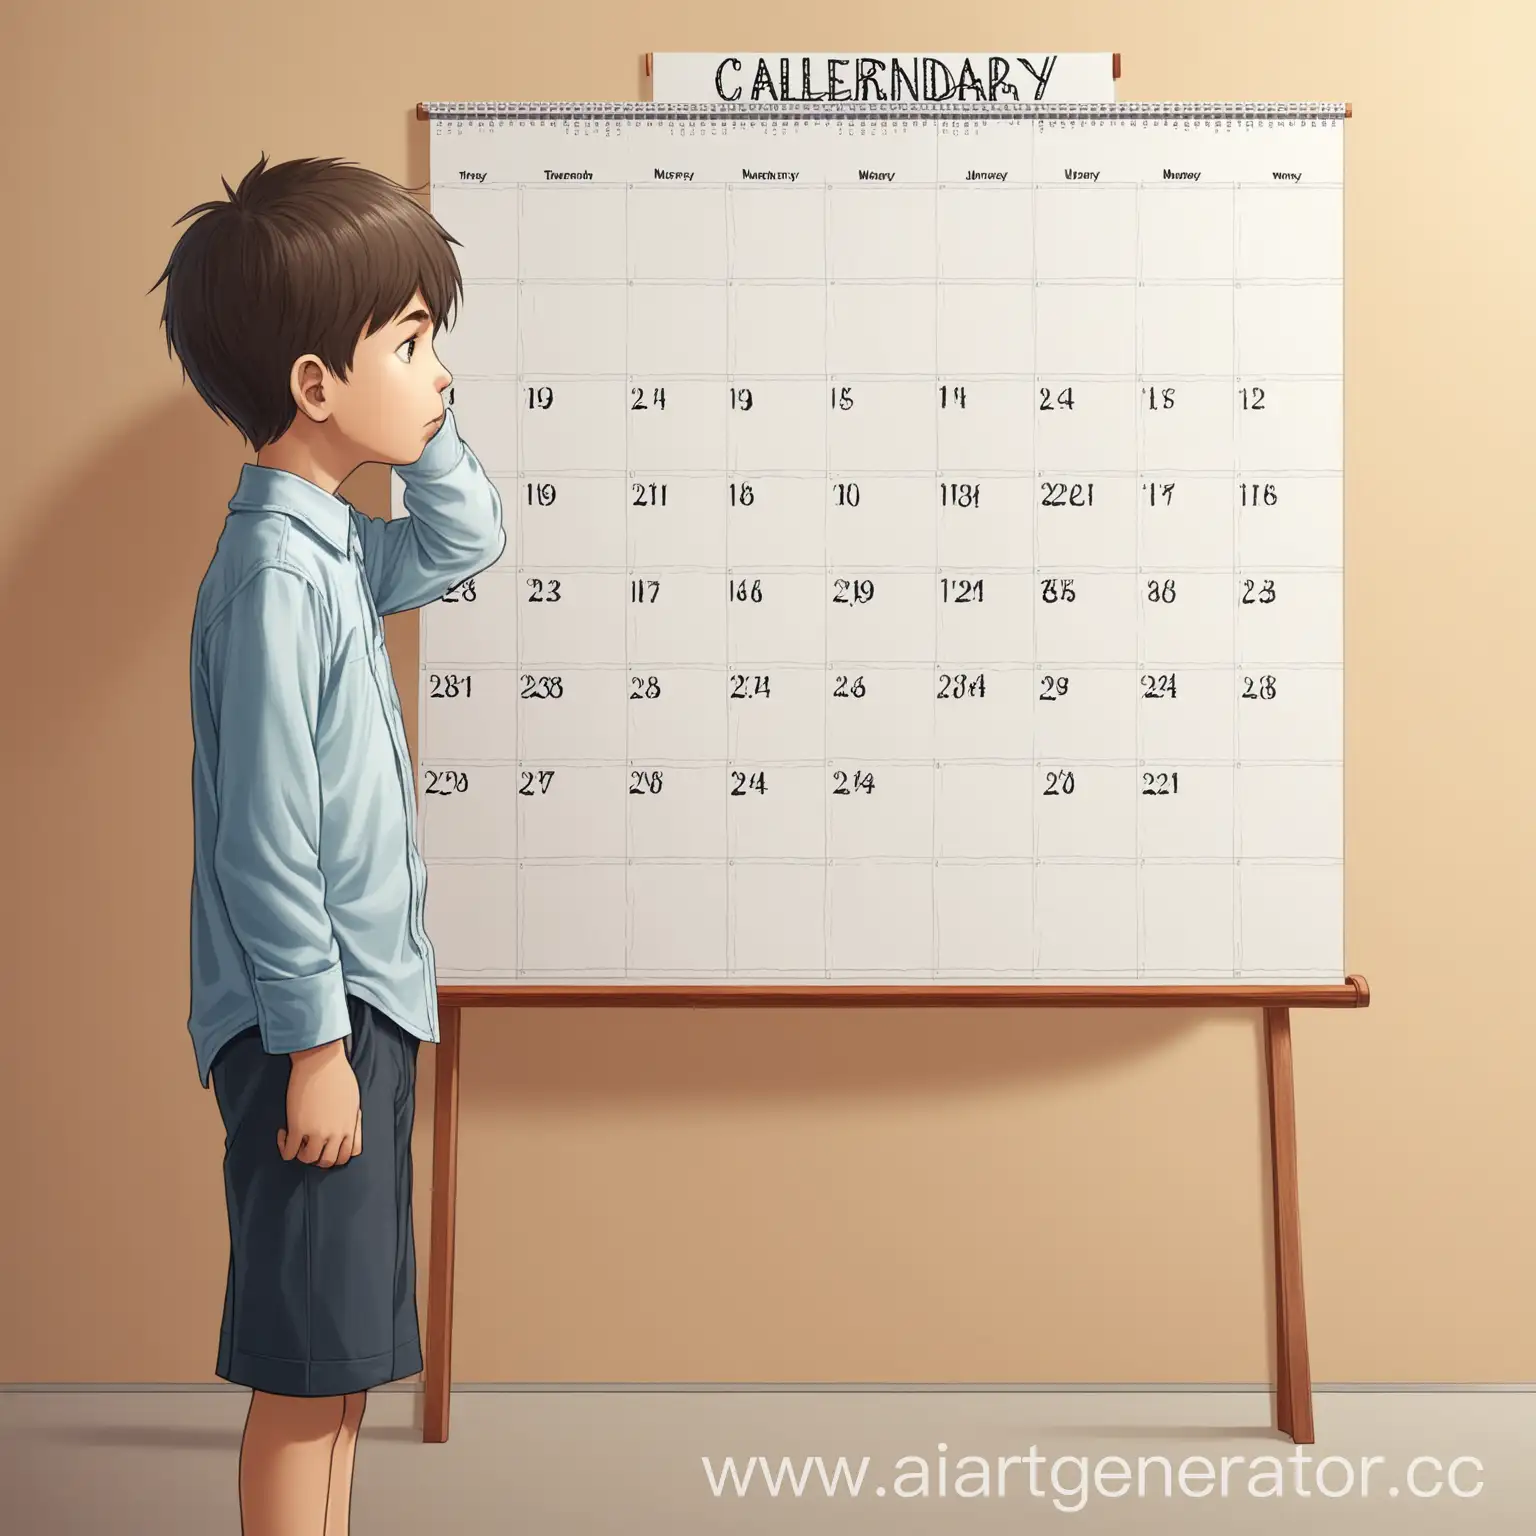 Boy-Standing-Near-Big-Calendar-Lost-in-Thought